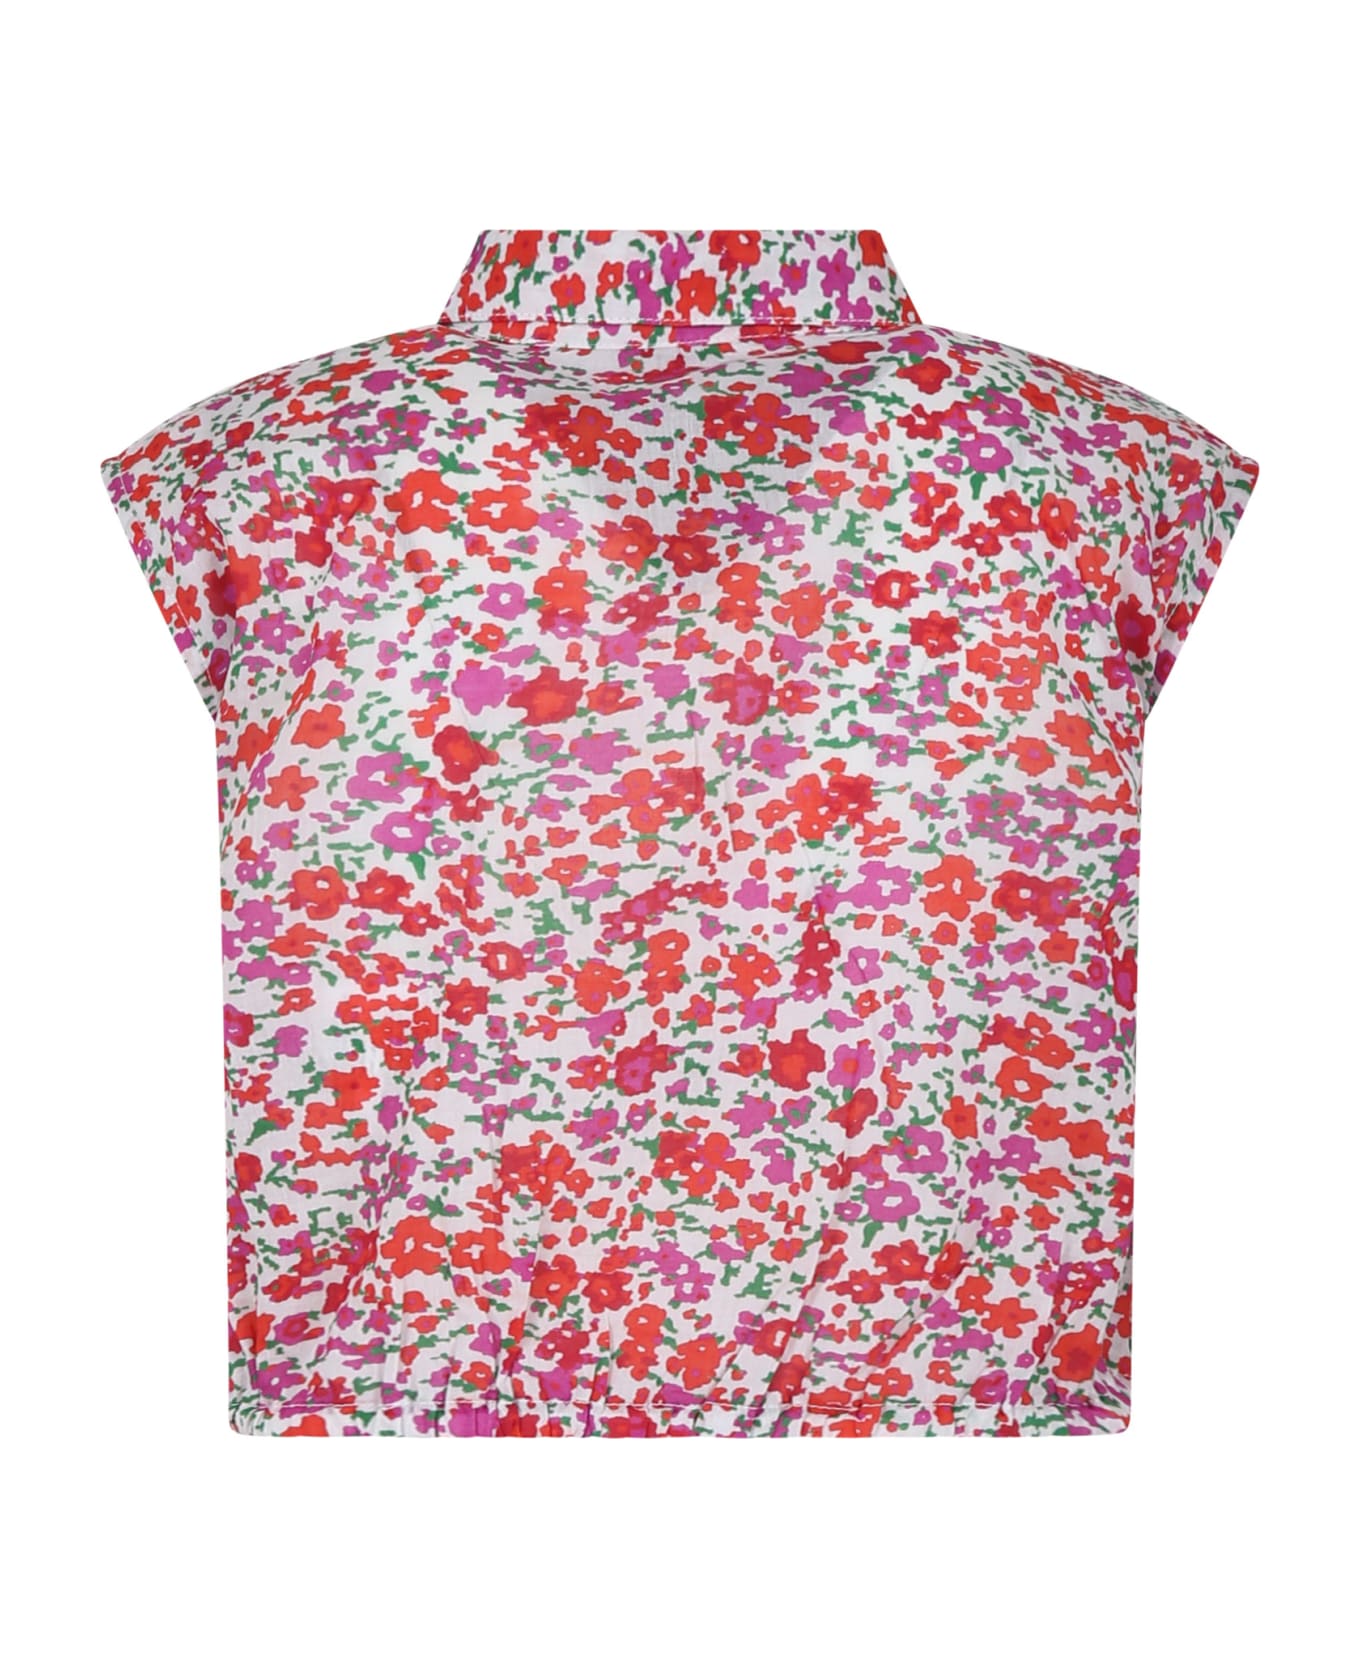 Philosophy di Lorenzo Serafini Kids White Top For Girl With Flowers - Multicolor